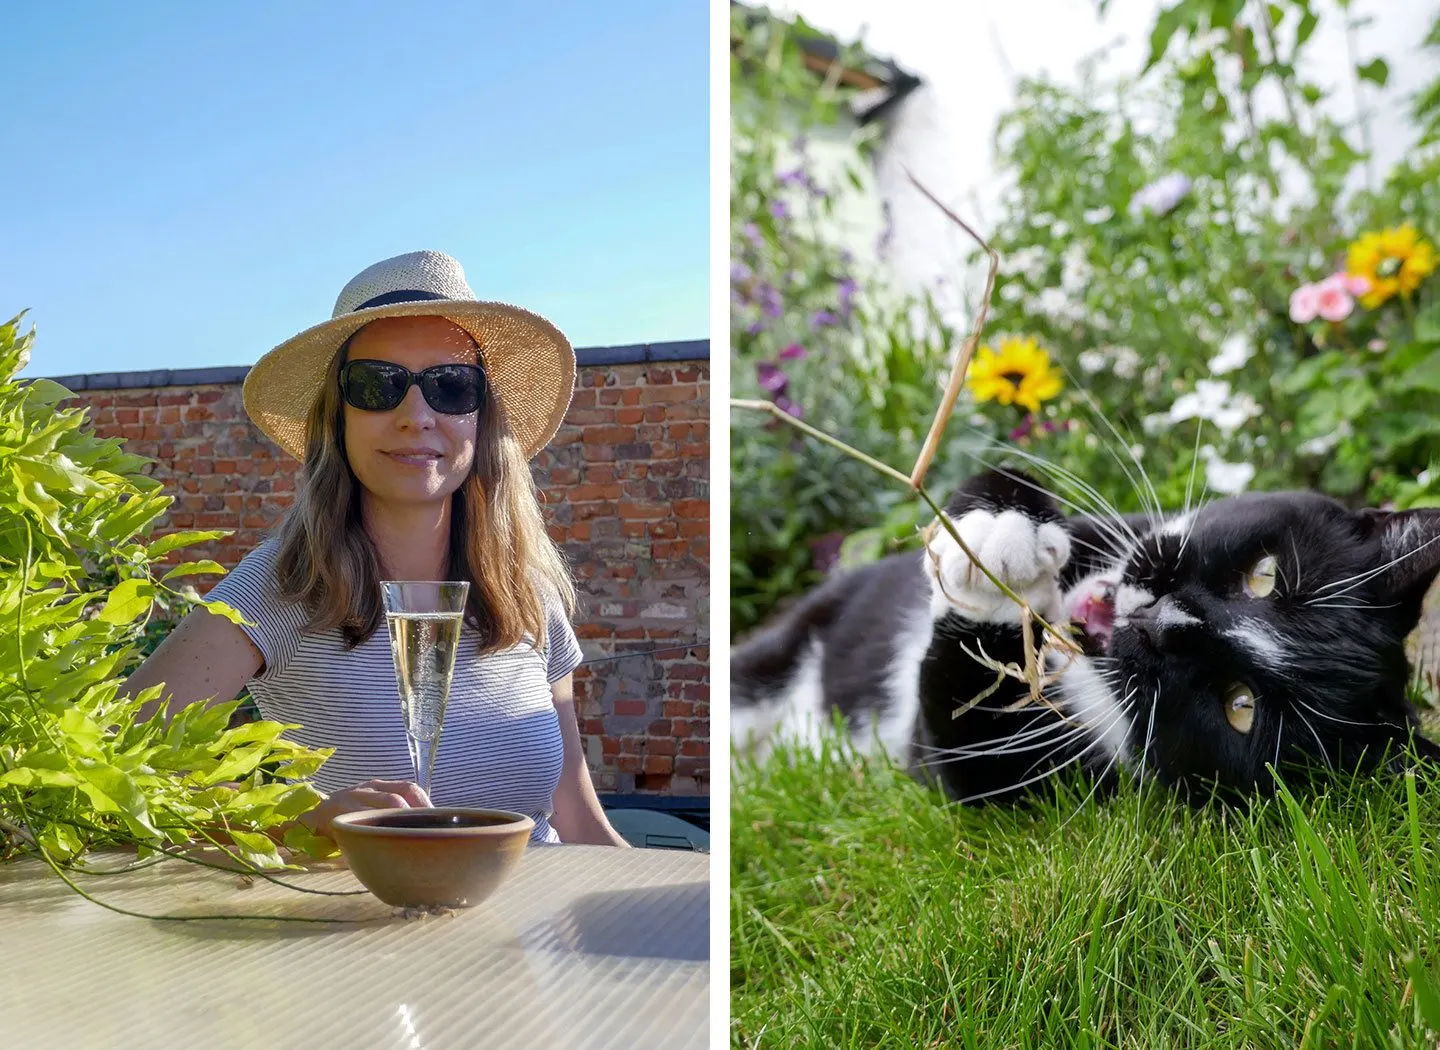 Lockdown life – shed roof proseccos and cats in the garden